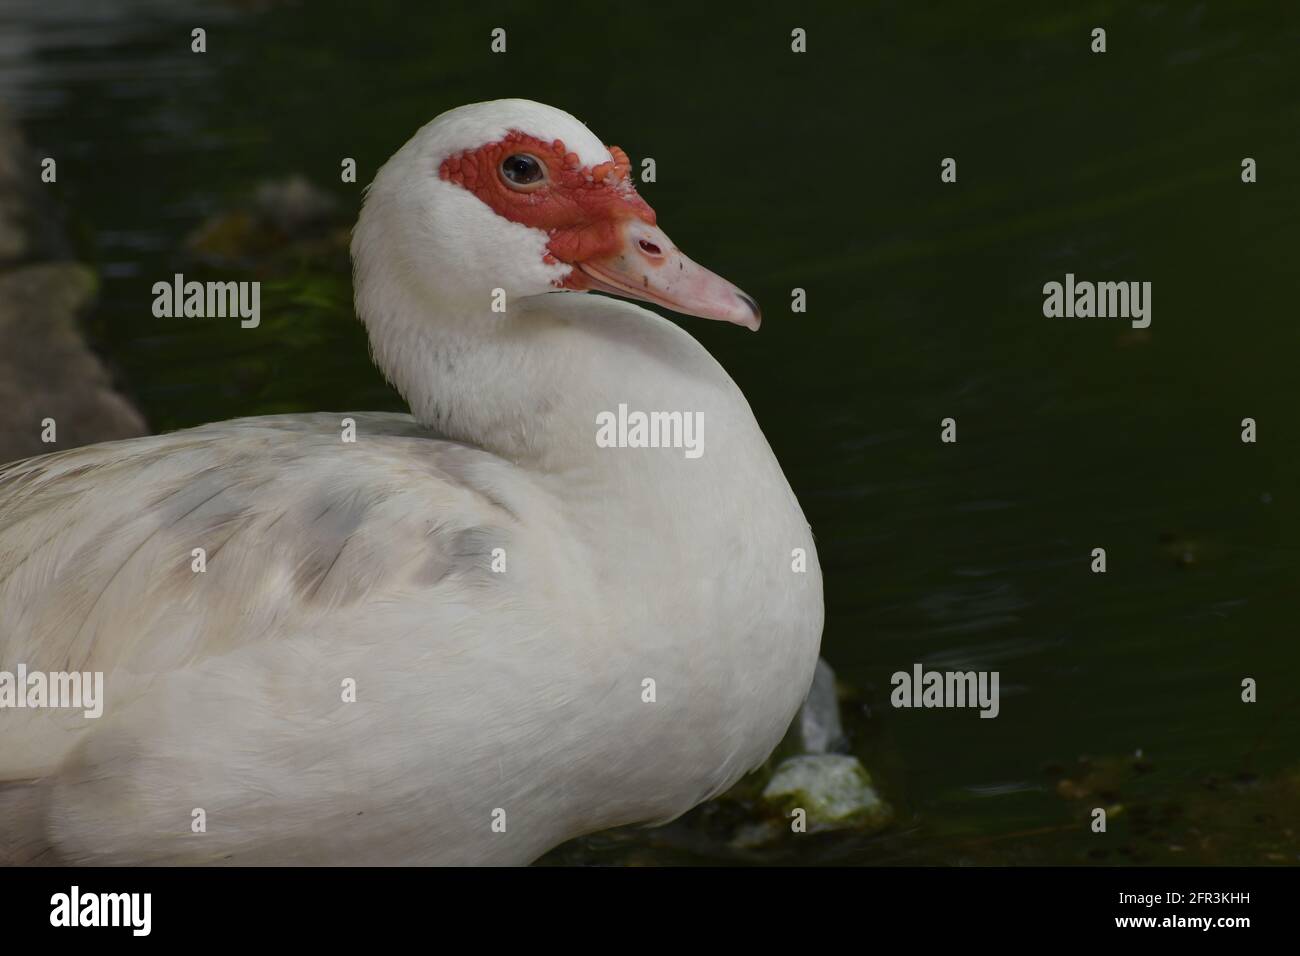 White Muscovy duck in St. John, Barbados. Stock Photo